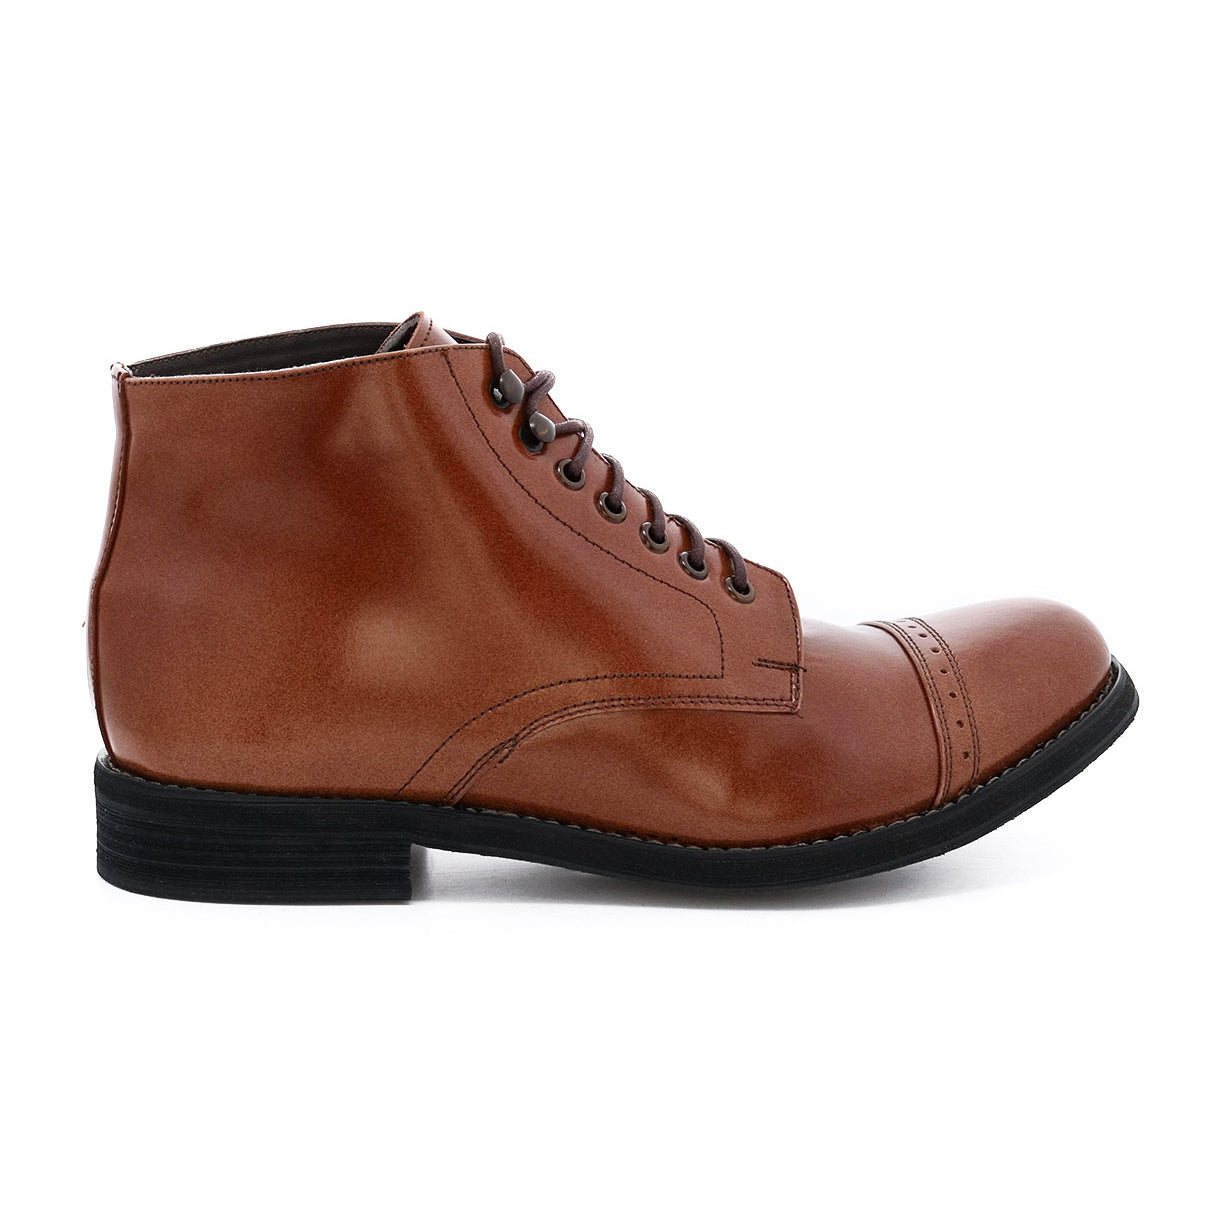 The Oak Tree Farms Howitzer boots exude sophistication and are perfect for casual occasions.